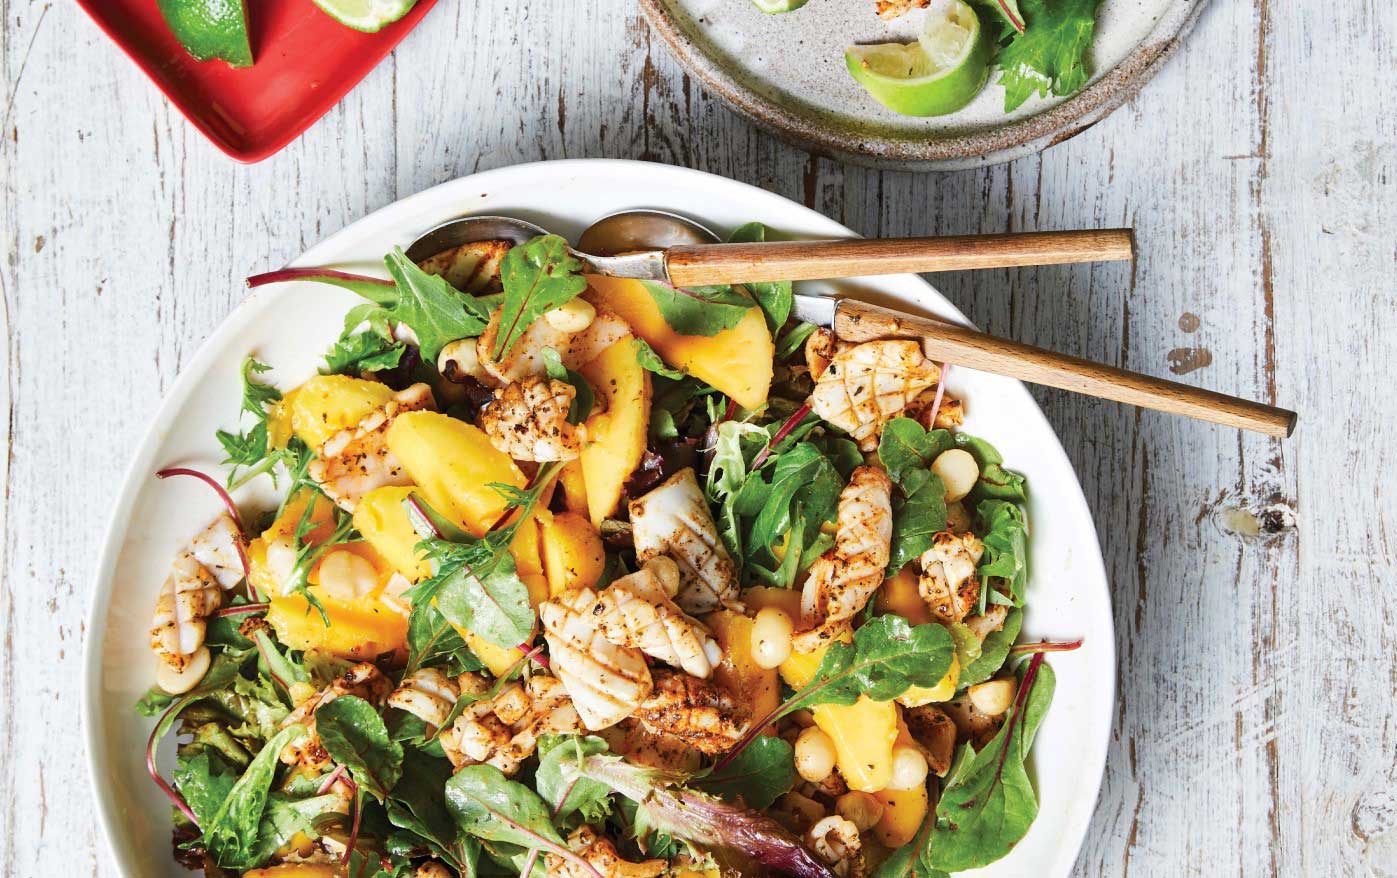 Colourful salad featuring mango, greens and grilled squid